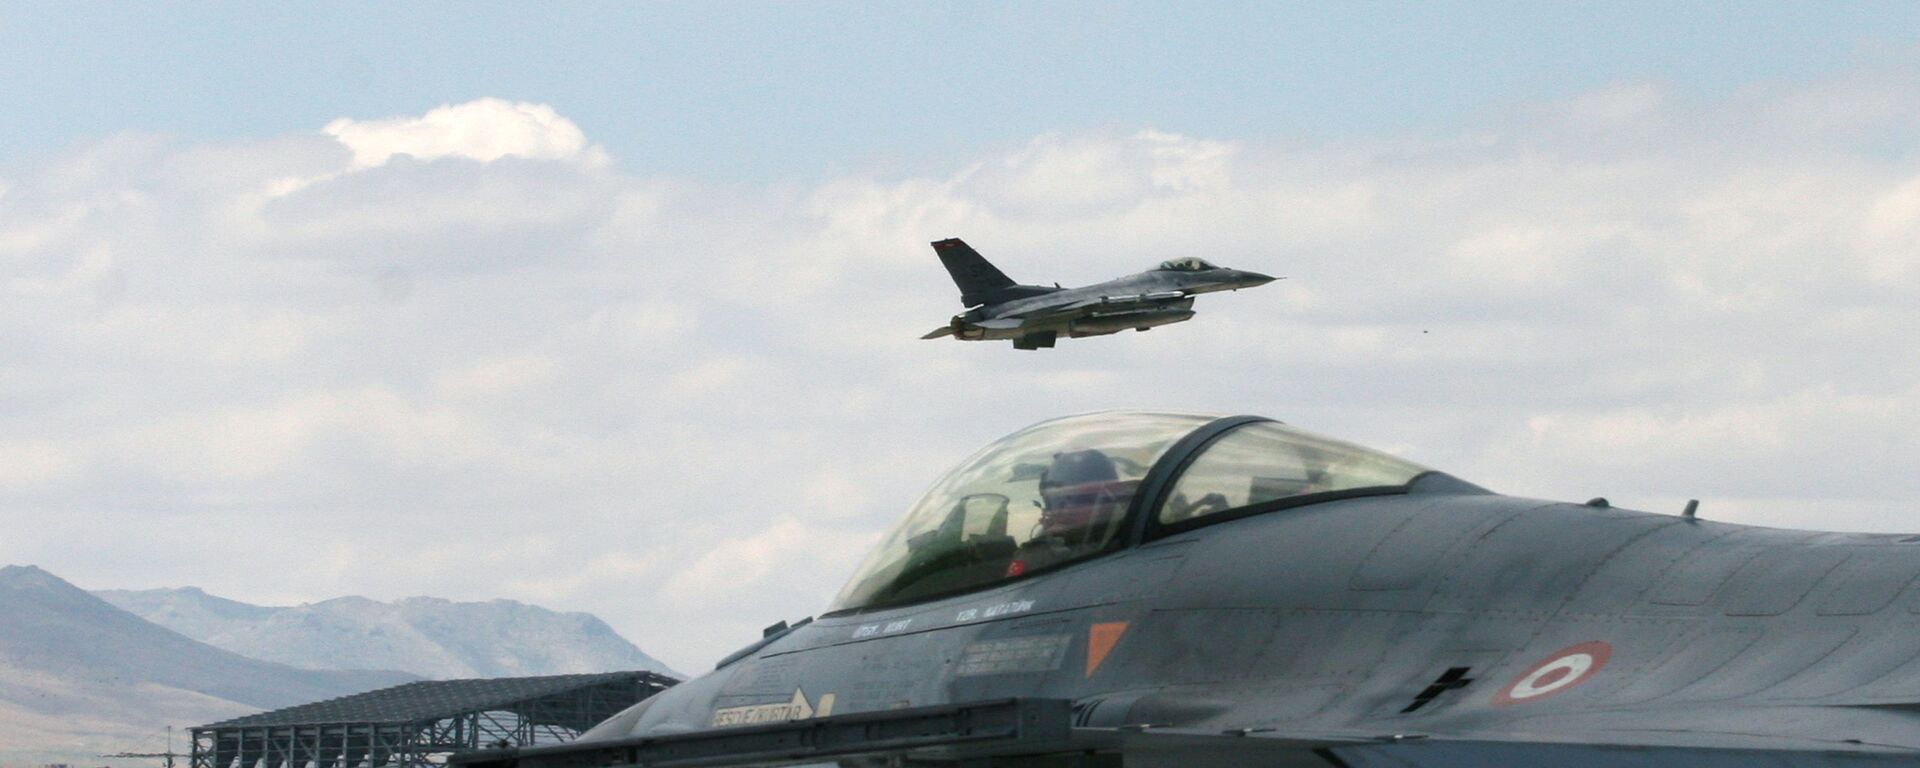 A Turkish F-16 prepares to taxi while another one takes off during Anatolian Eagle exercise at 3rd Main Jet Air Base near the central Anatolian city of Konya, Turkey, Monday, June 15, 2009 - Sputnik International, 1920, 20.12.2022